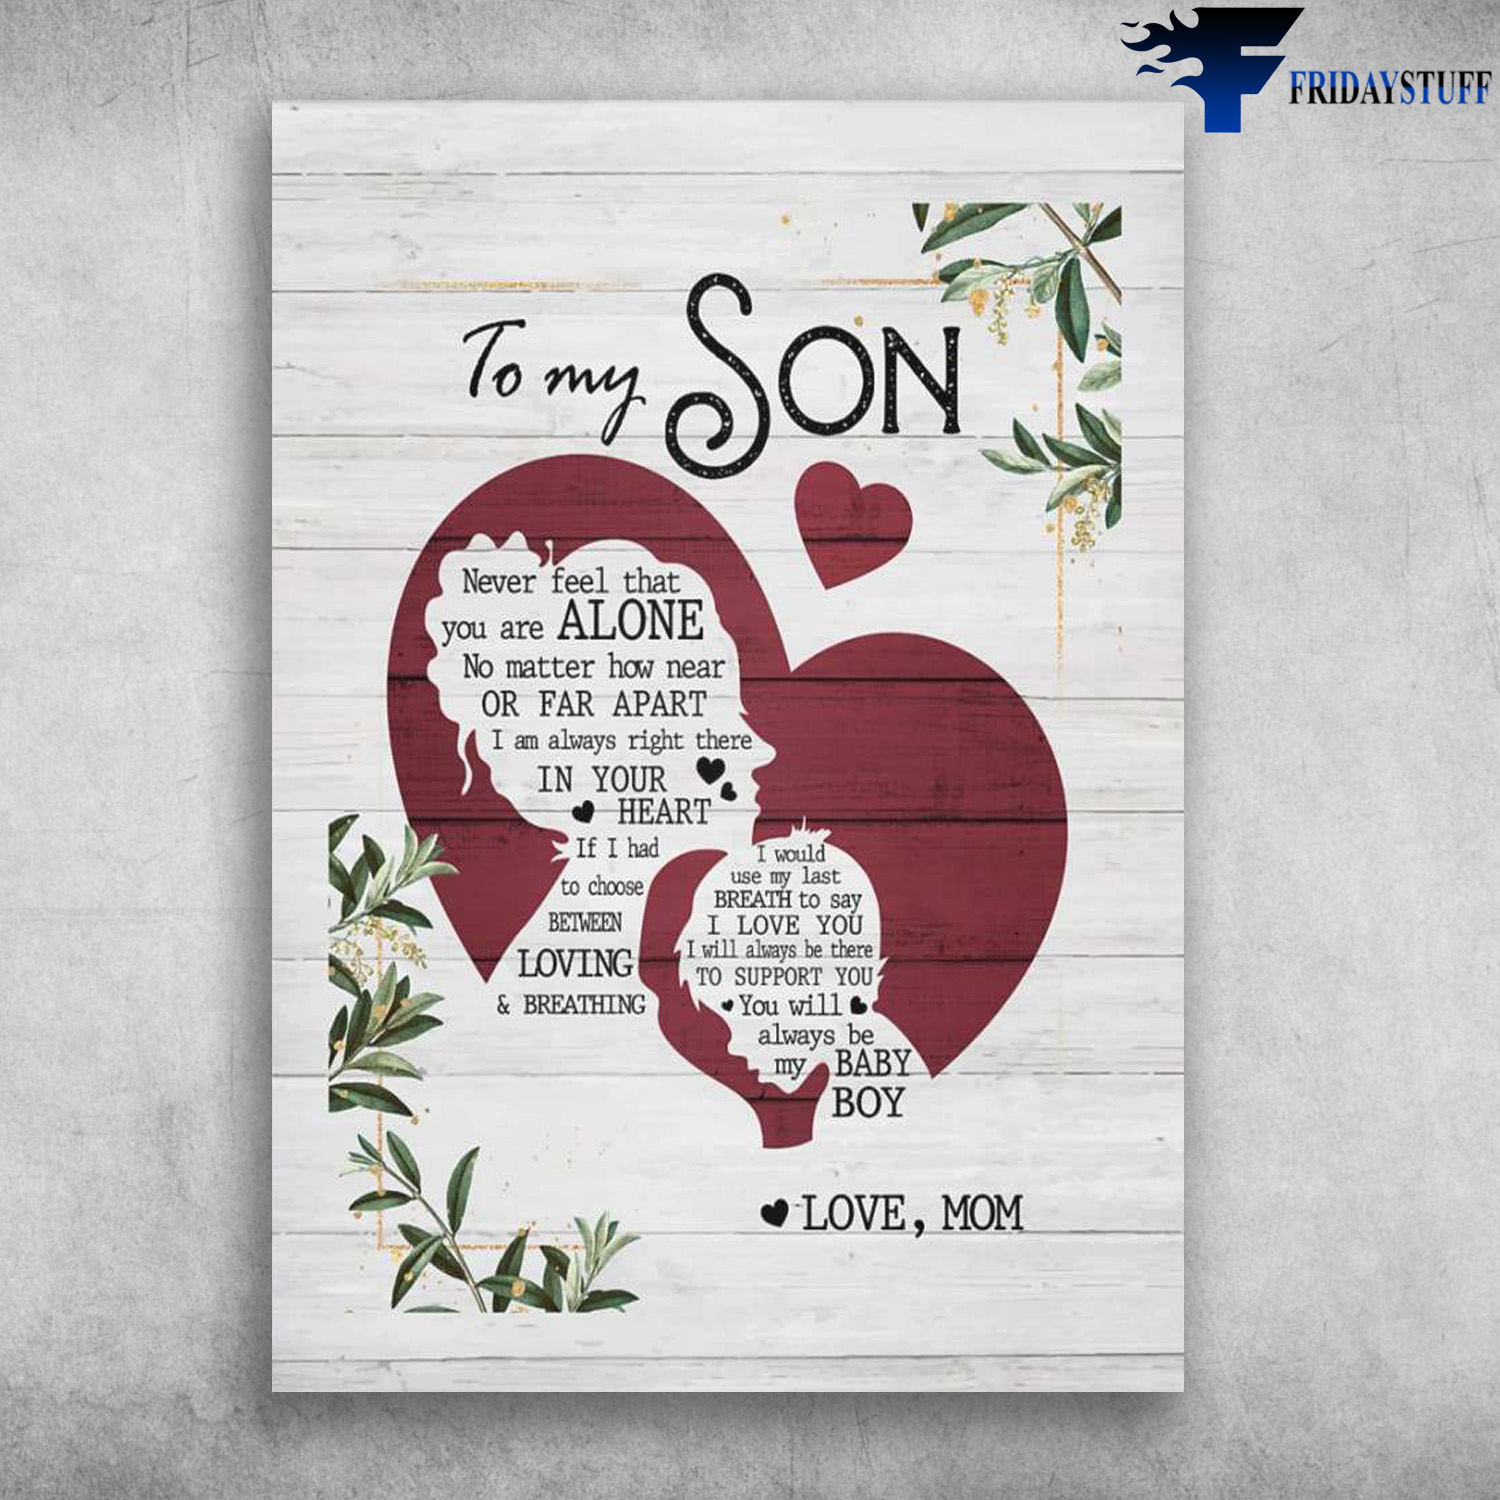 Mom And Son - To My Son, Never Feel That You Are Alone, Notter How Near, Or Far Apart, I Am Always Right There, In Your Heart, If I Had To Choose Between, Loving And Breathing